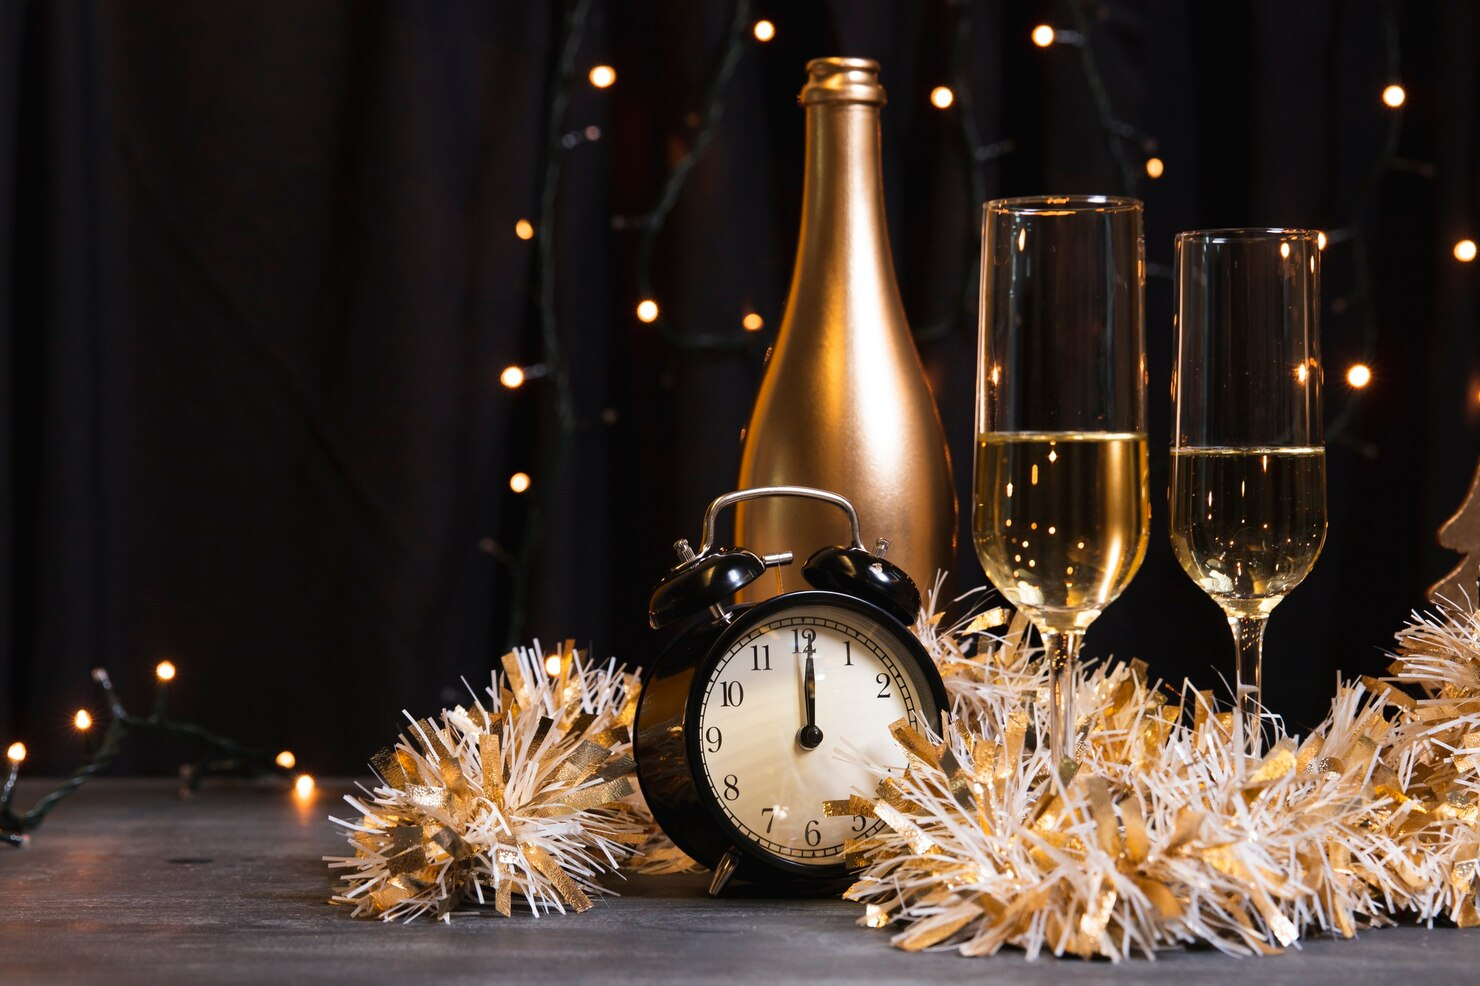 A small clock striking midnight alongside flutes of champagne to celebrate the New Year